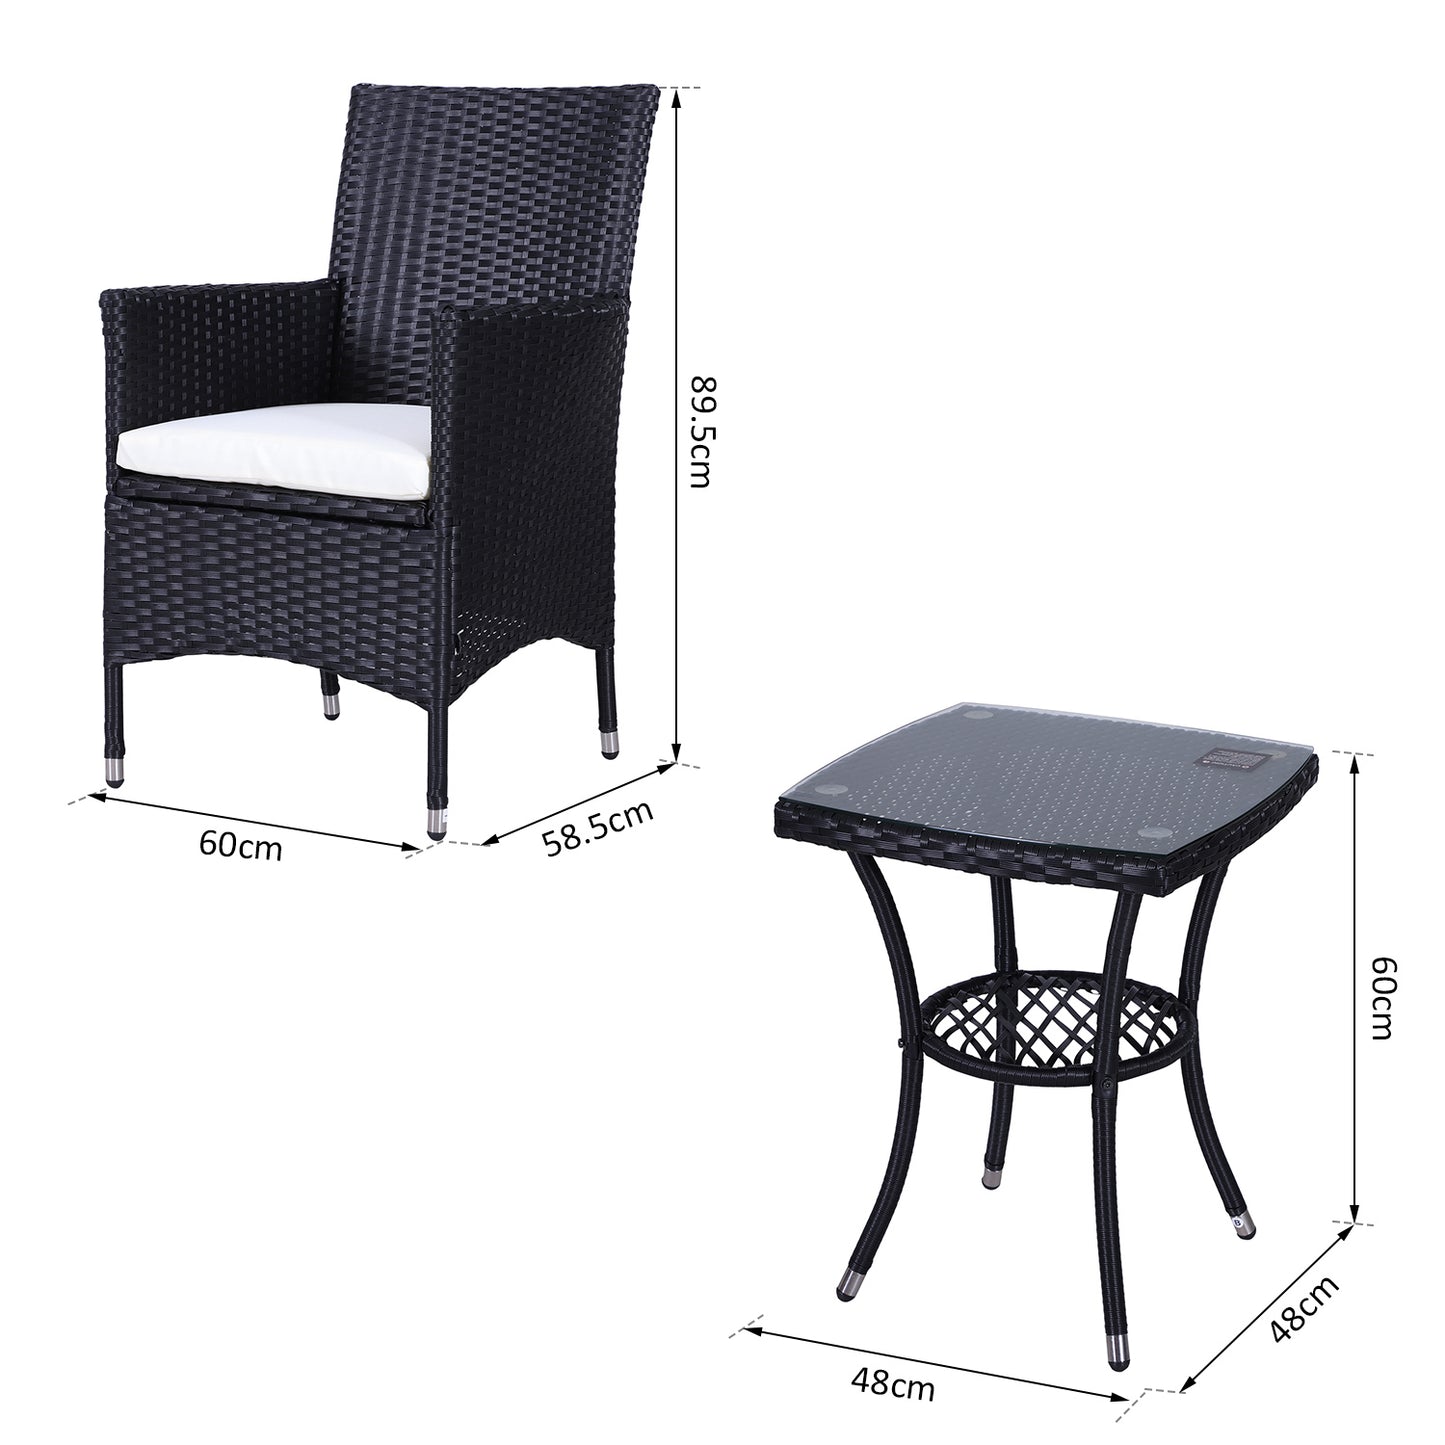 Outsunny 2 Seat Twin Rattan Bistro Chair and Table Set Black